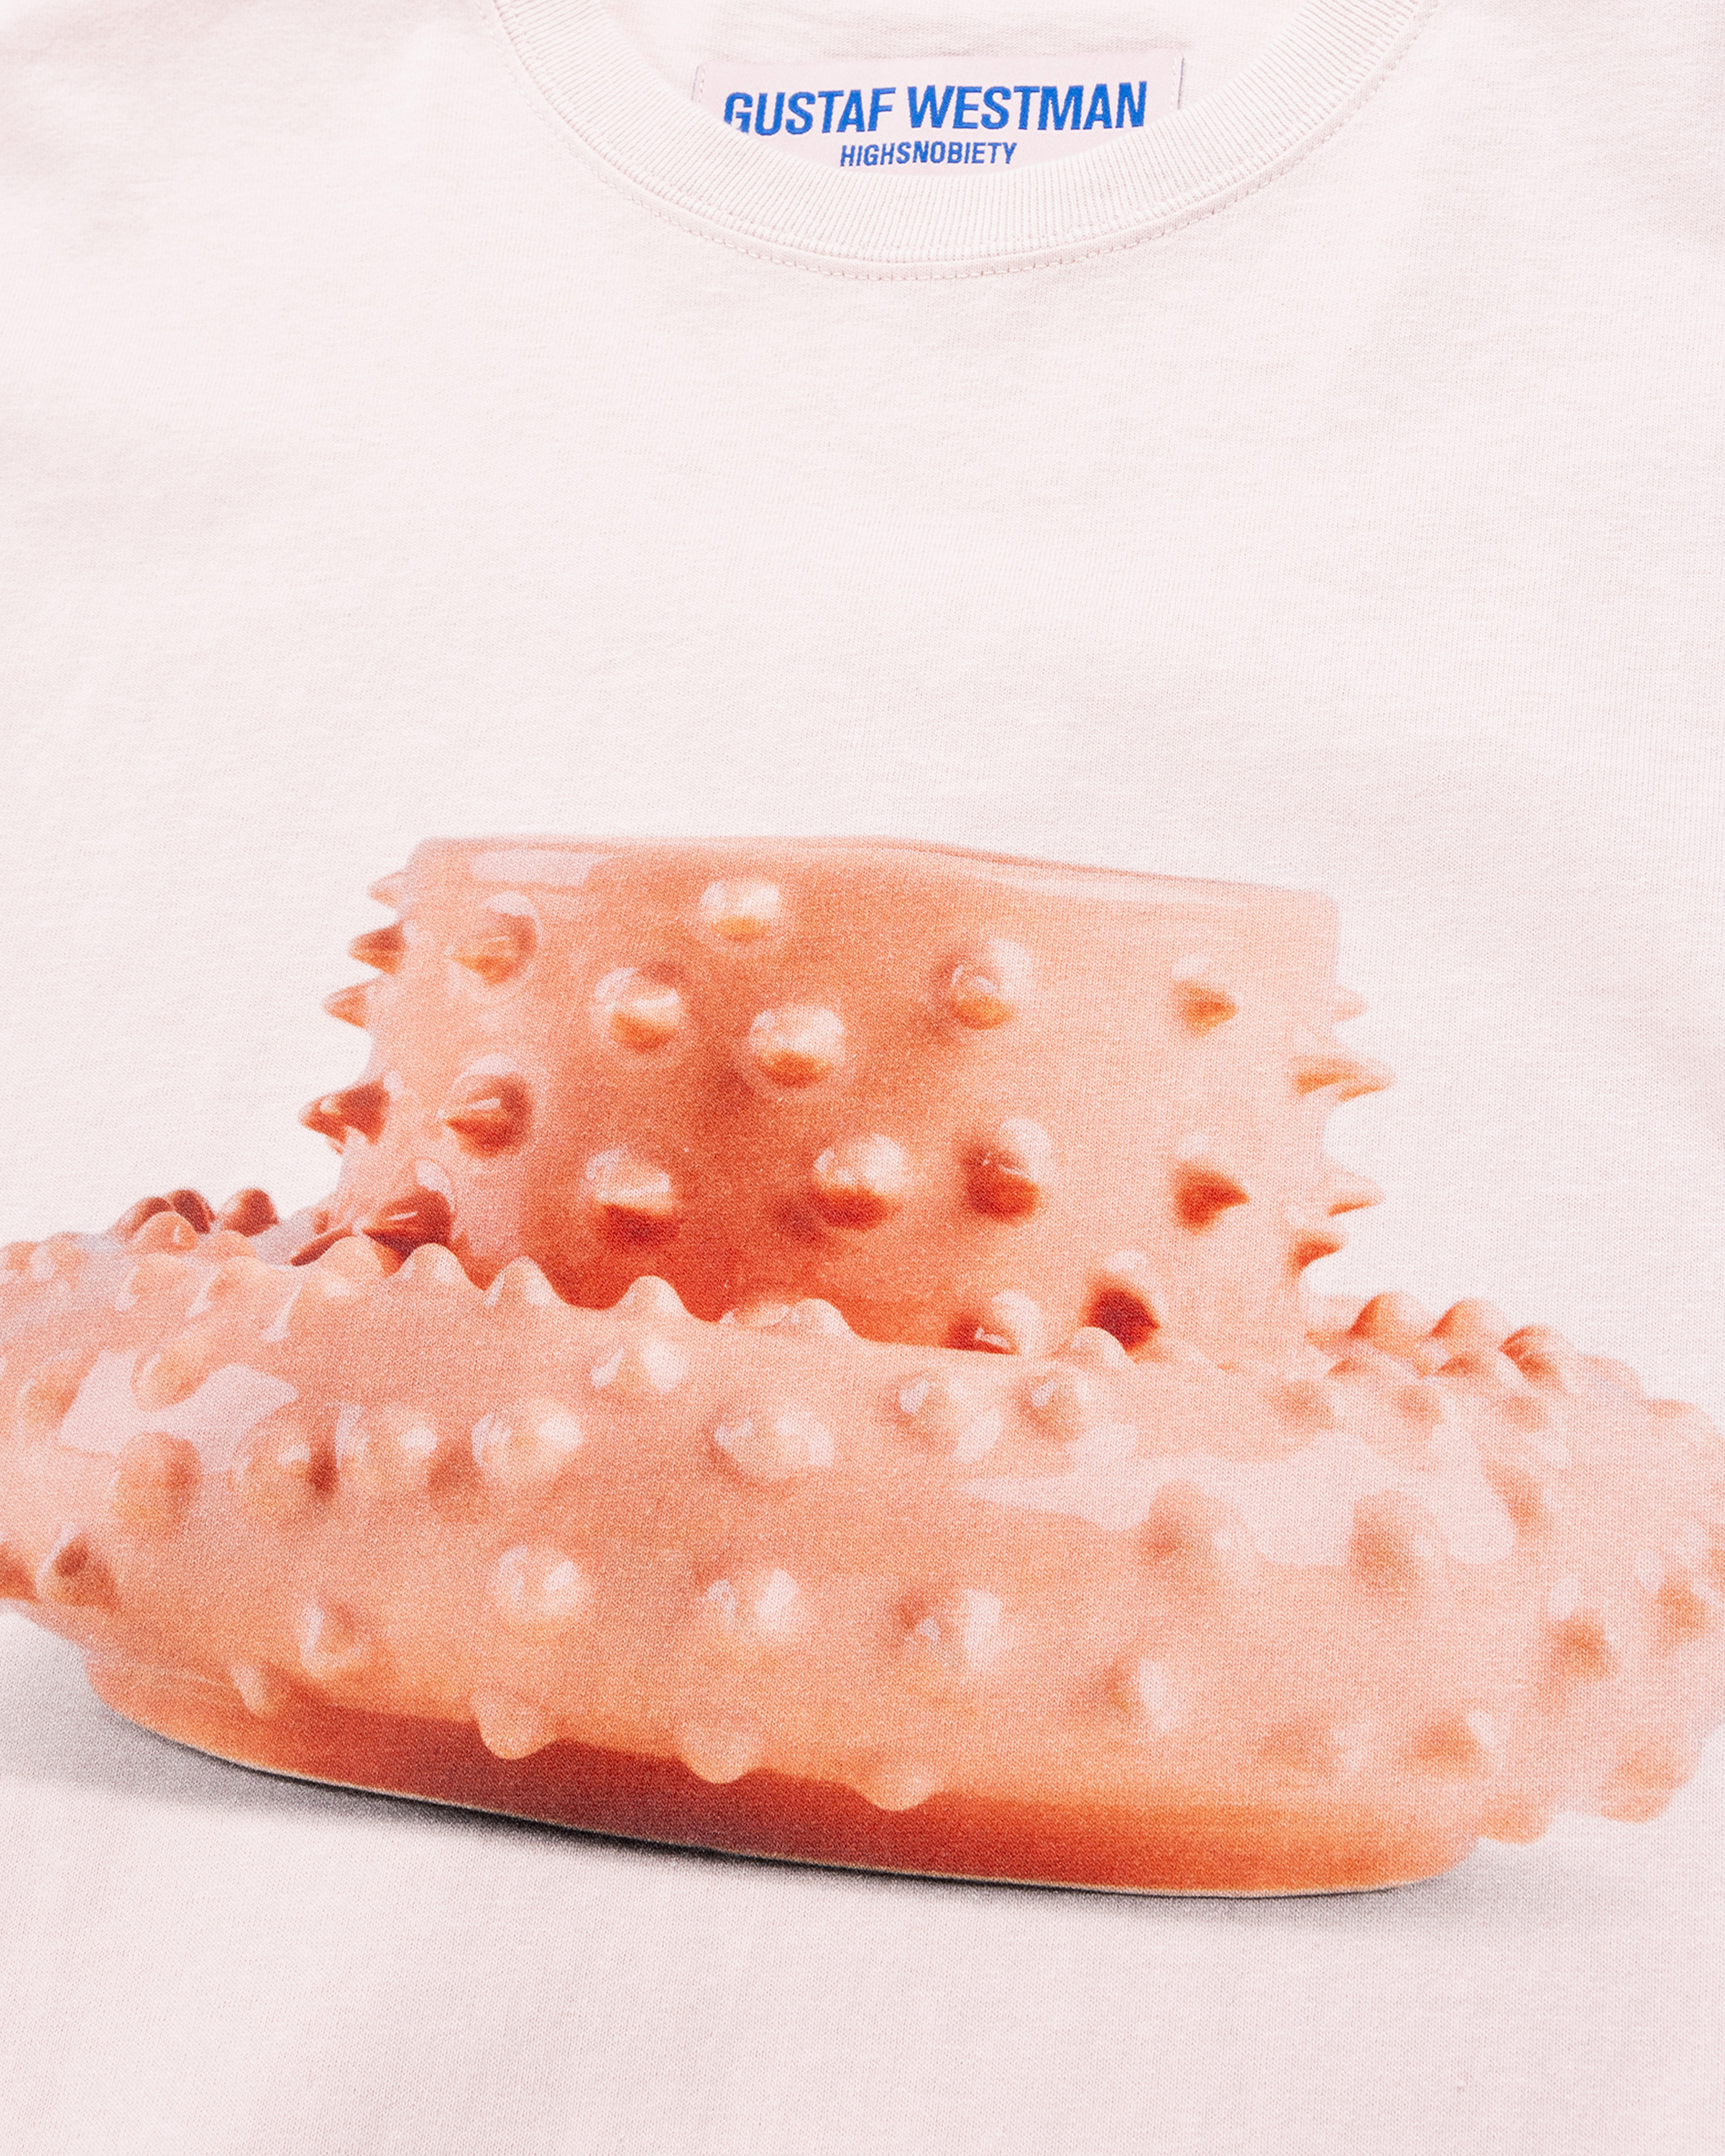 Highsnobiety x Gustaf Westman – Spiky Cup and Saucer T-Shirt Pink  - T-Shirts - Pink - Image 9